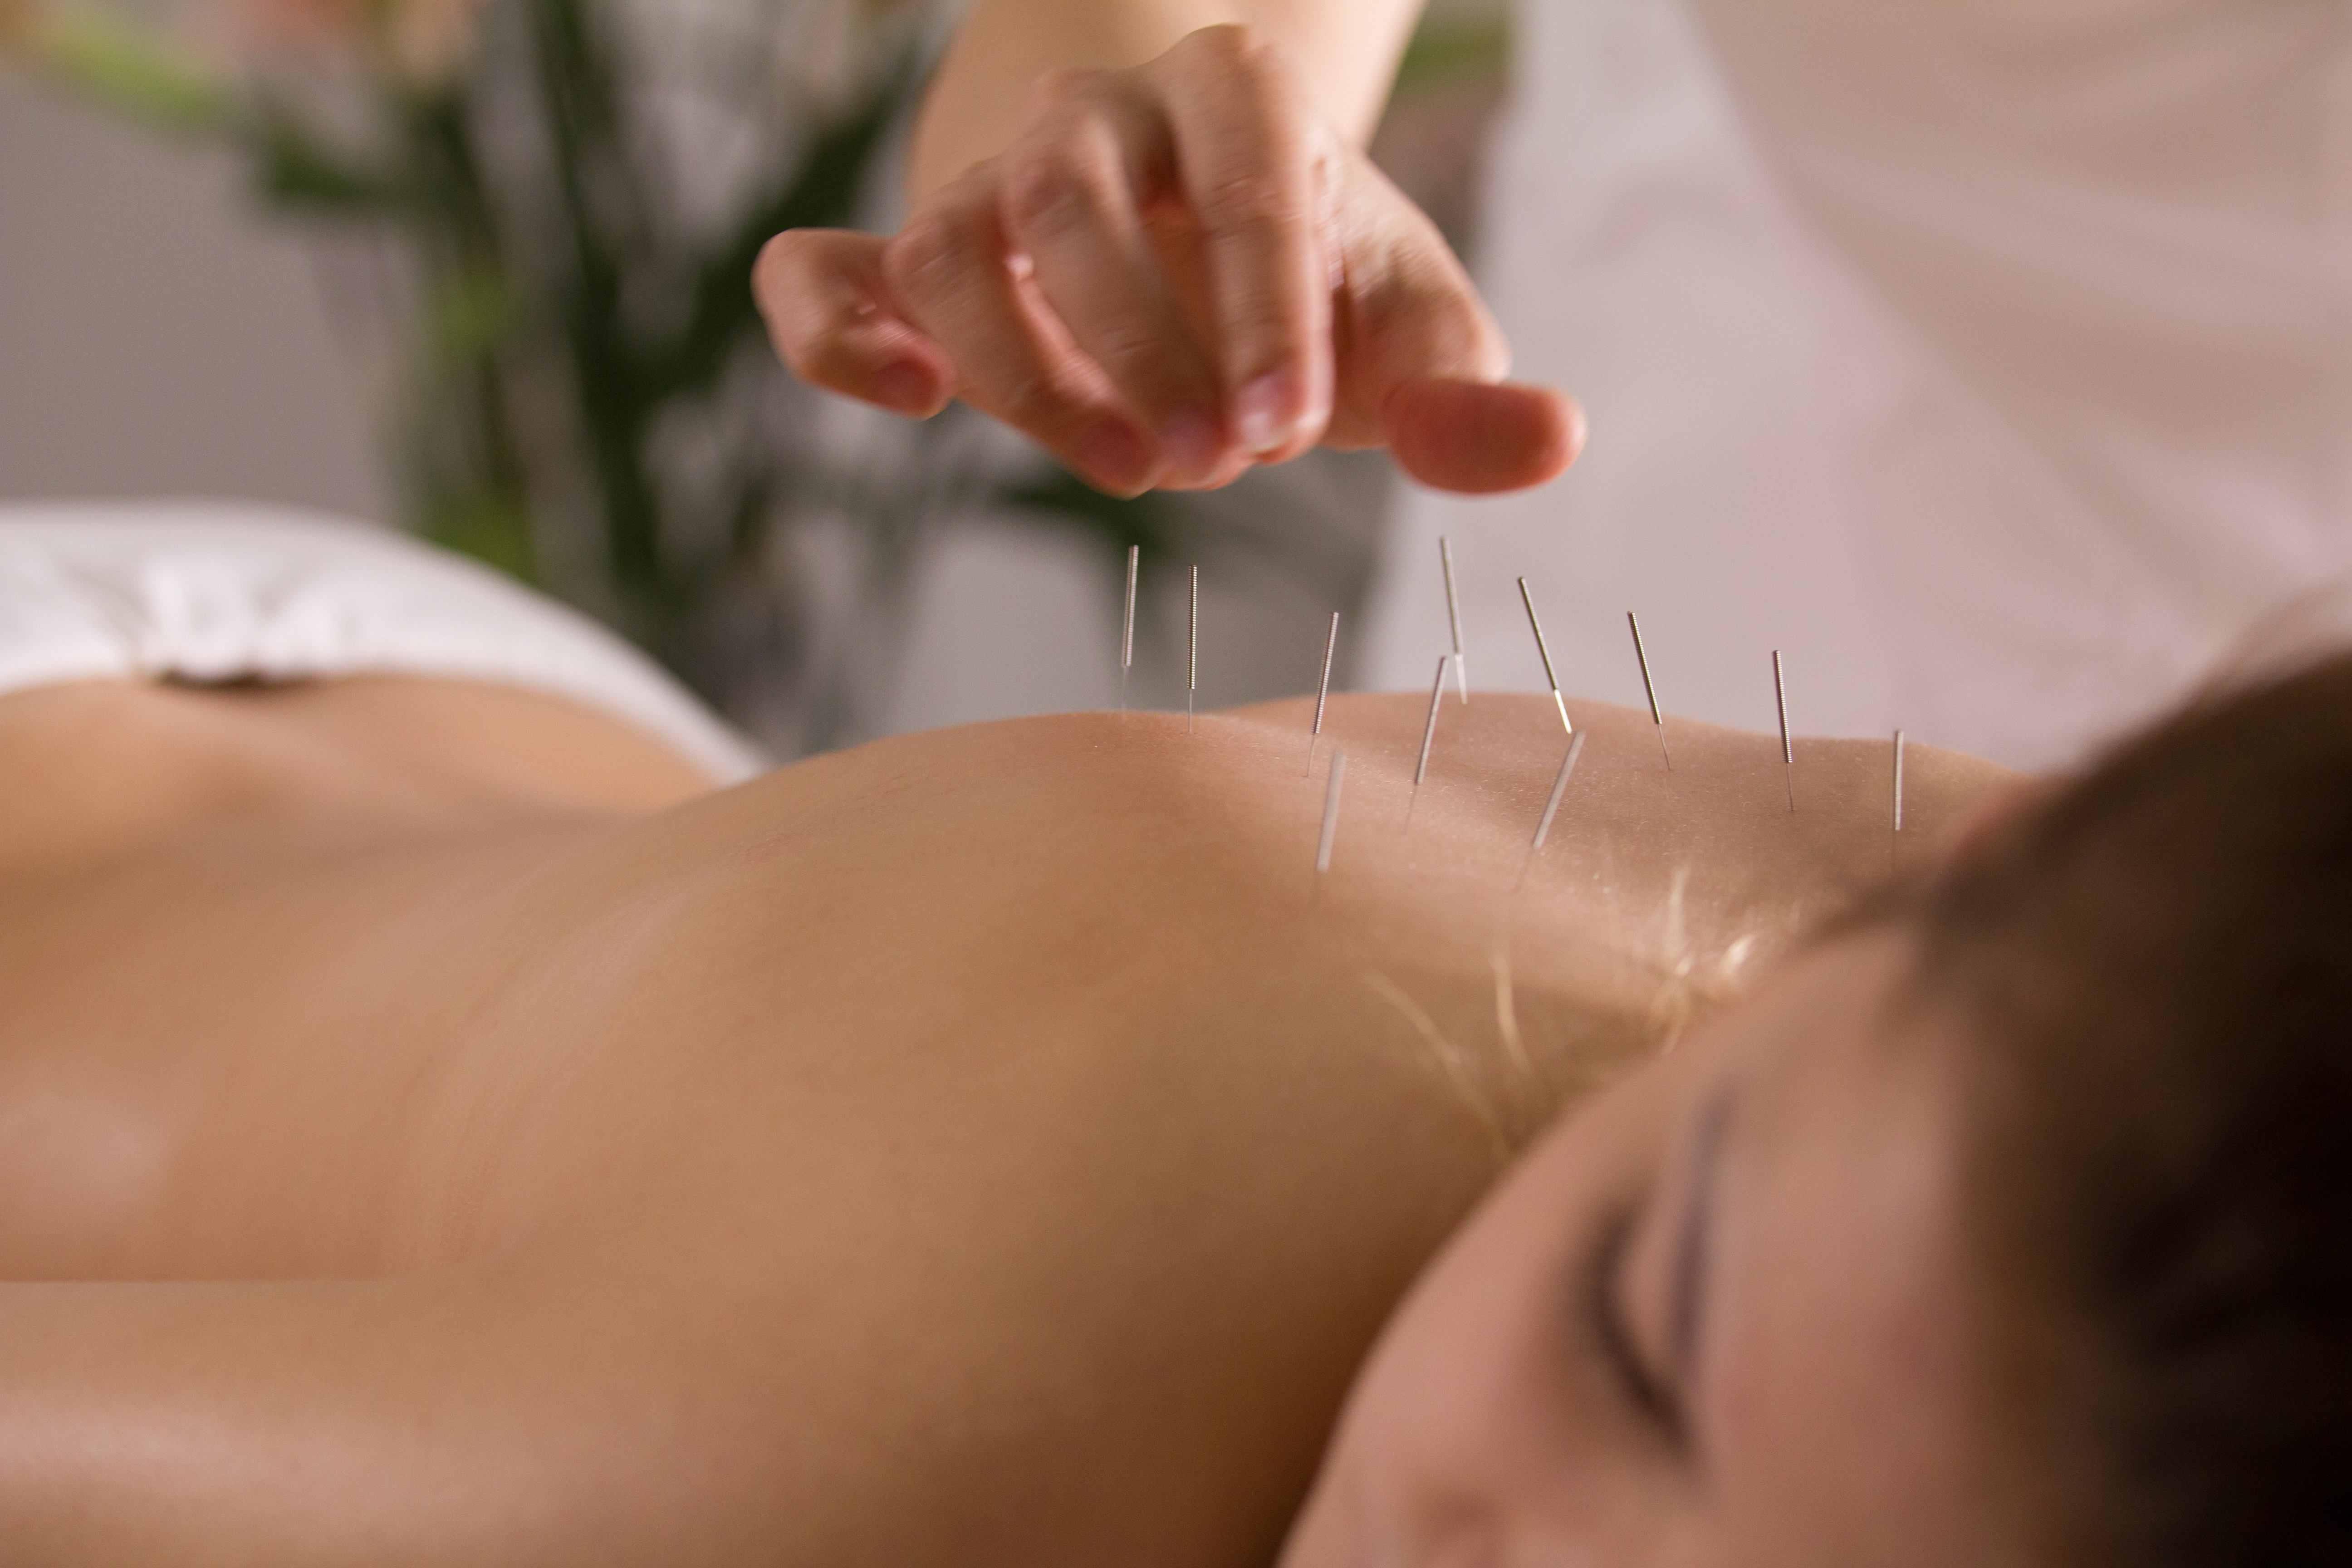 Acupuncture therapy